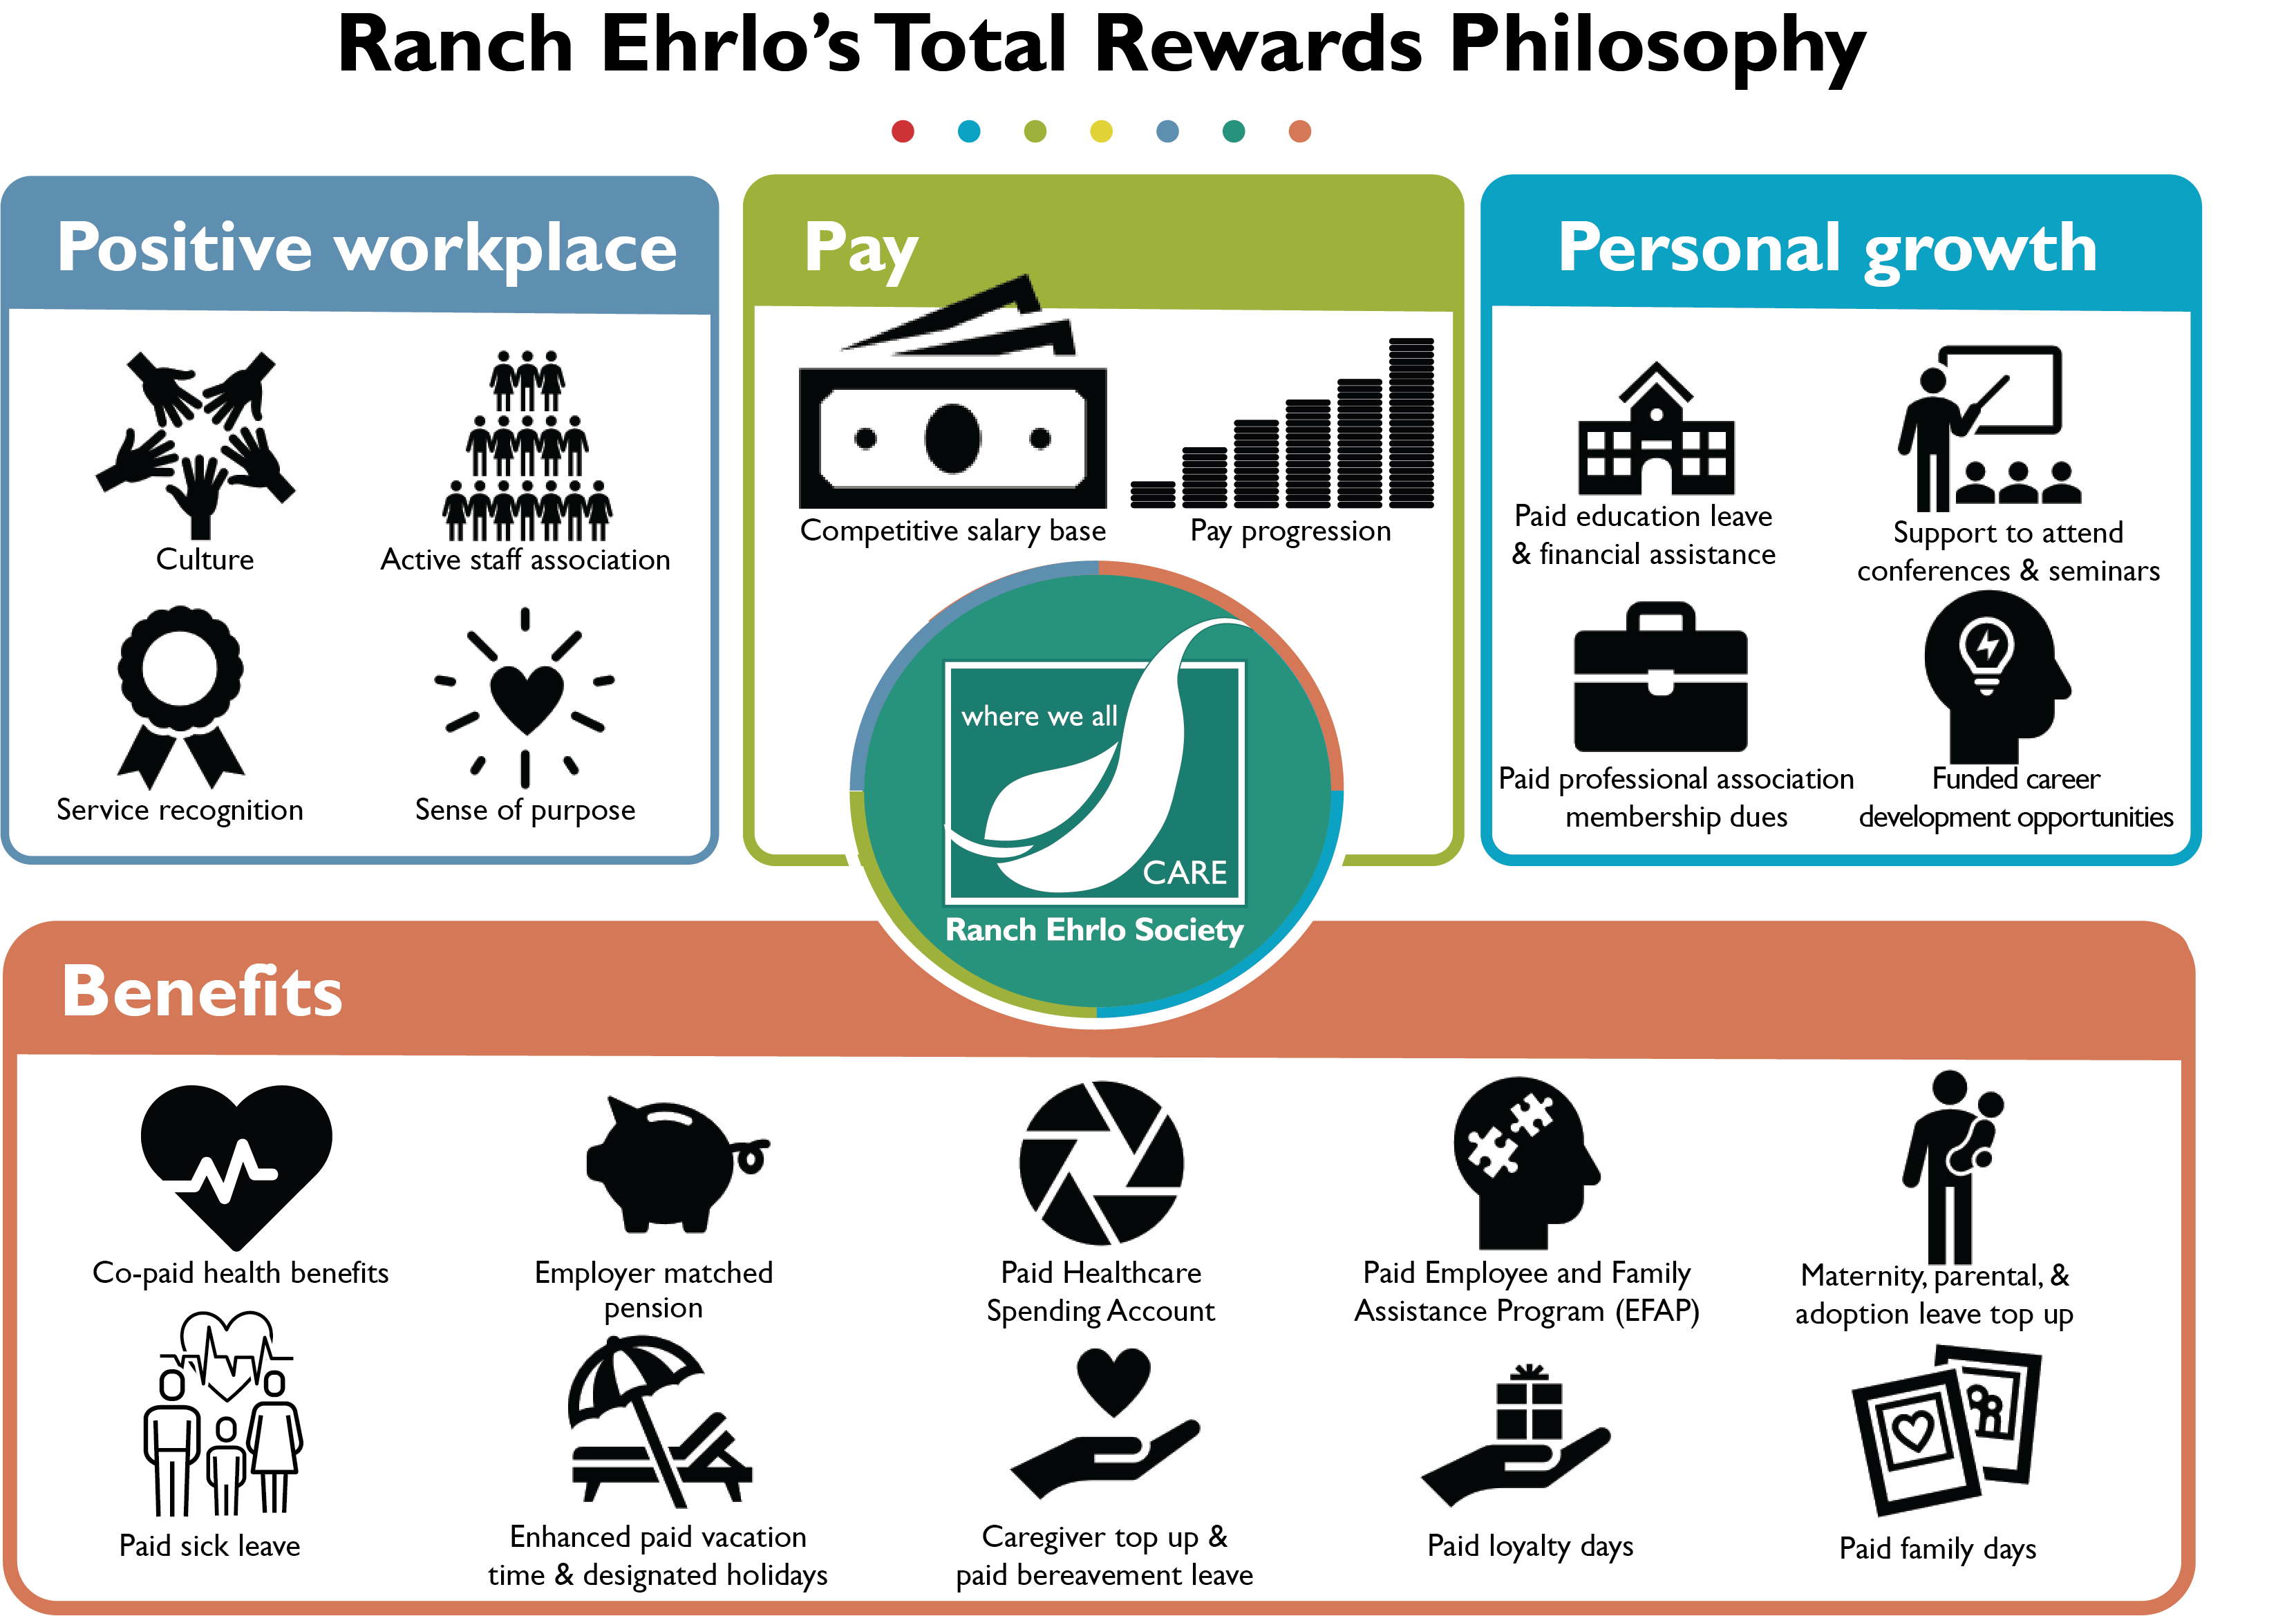 Ranch Ehrlo Total Rewards, Positive workplace, pay, personal growth, and benefits.